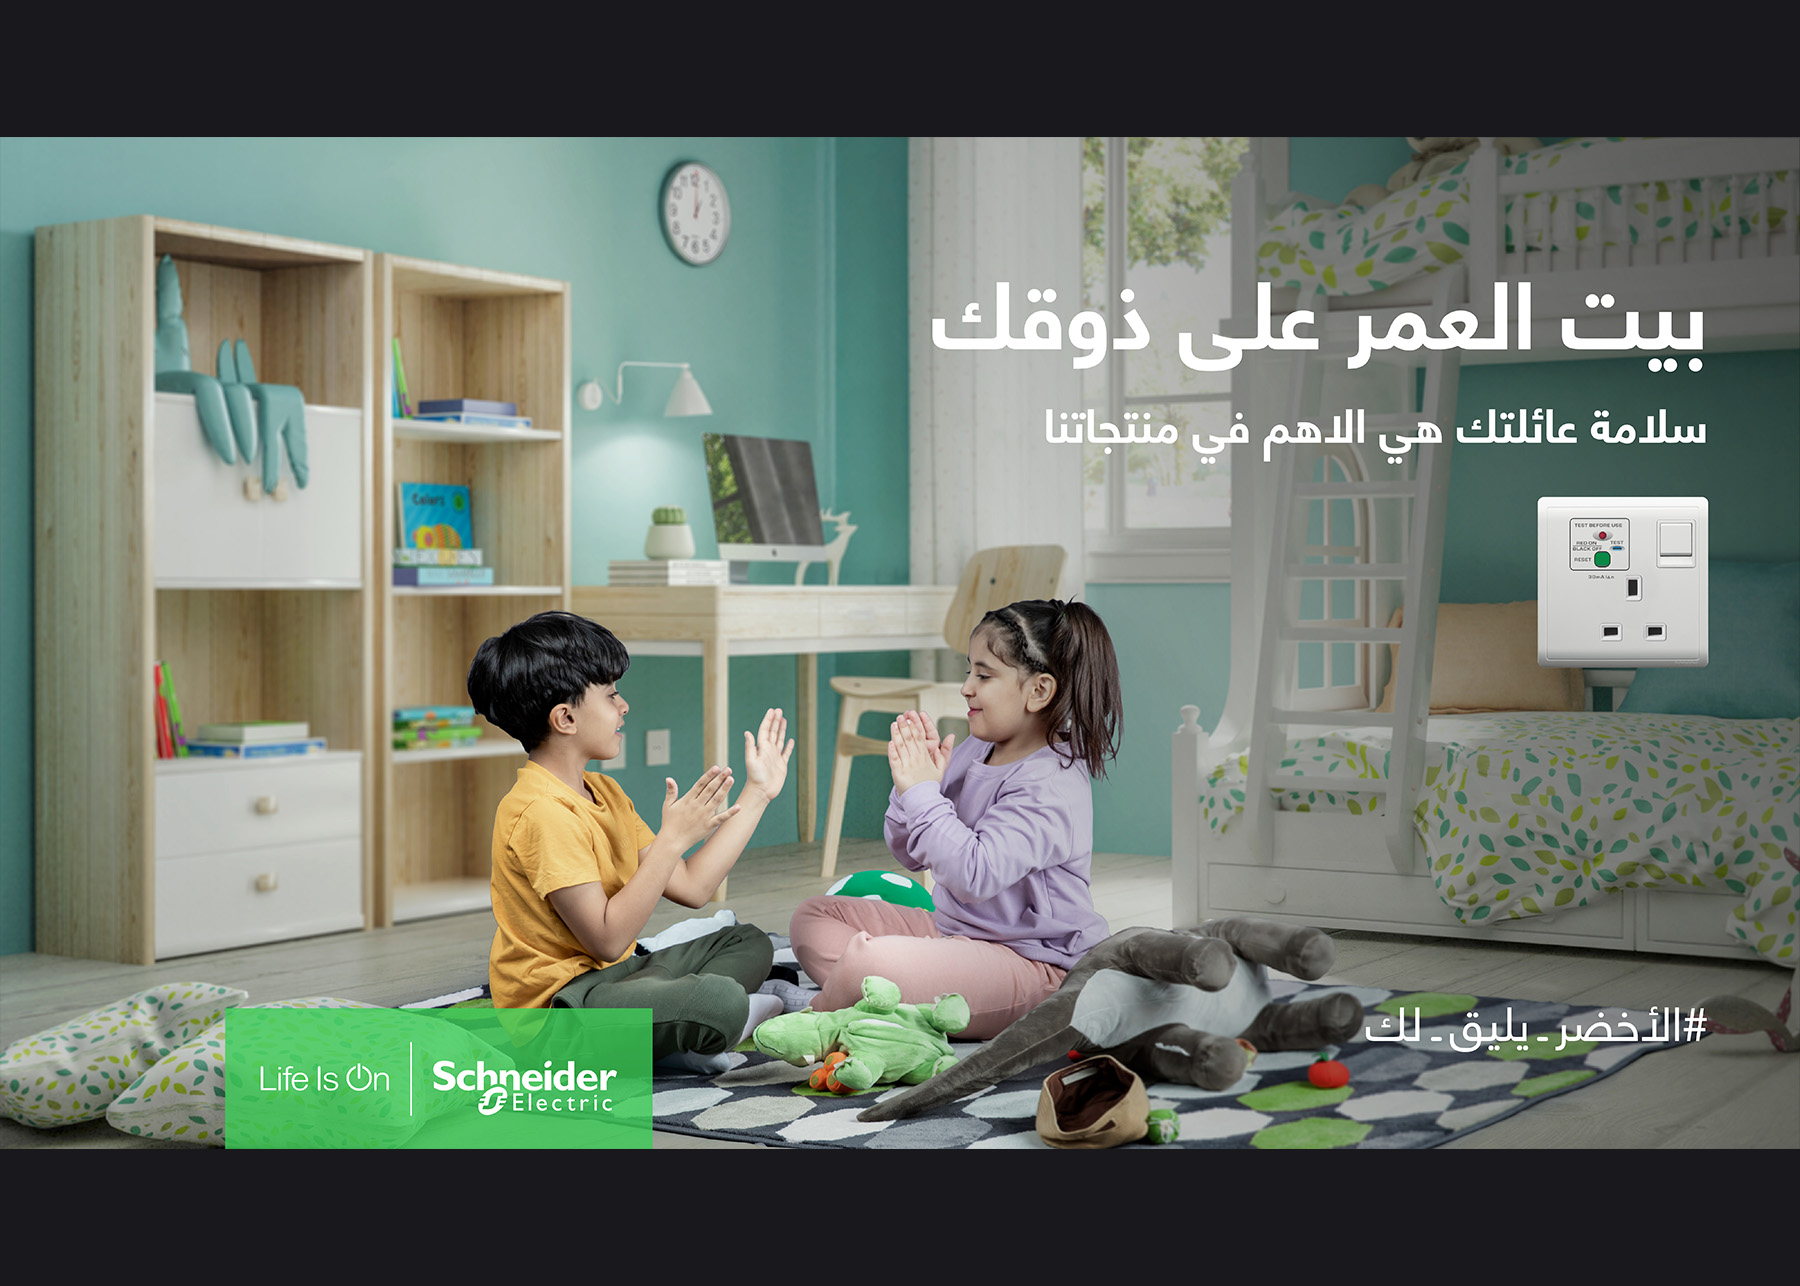 Static social media post for Schneider Electric campaign